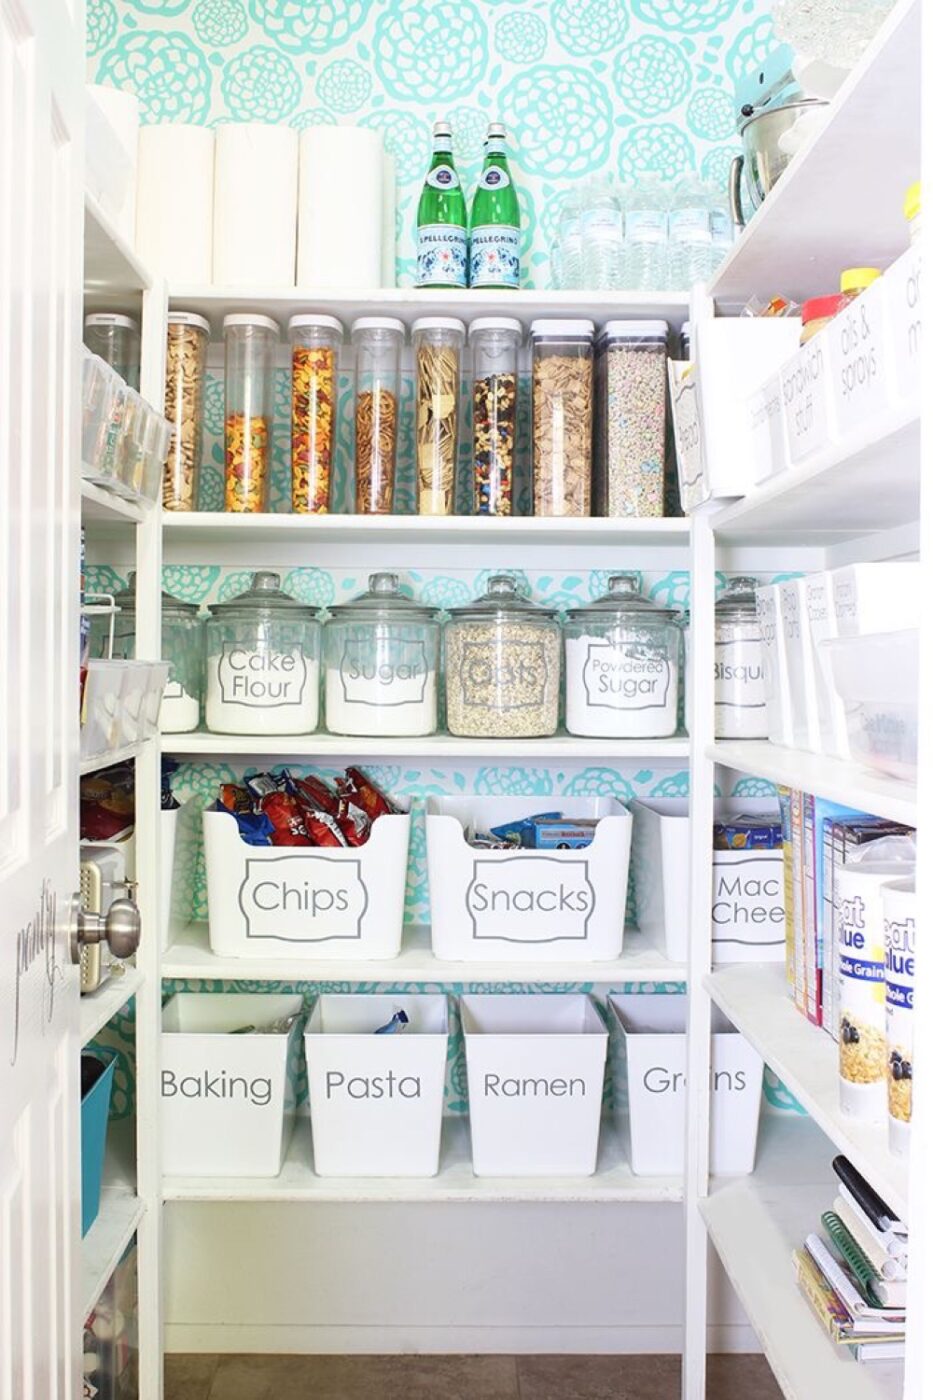 Practical Kitchen Organization Ideas Must Include Labeled Canisters and Containers